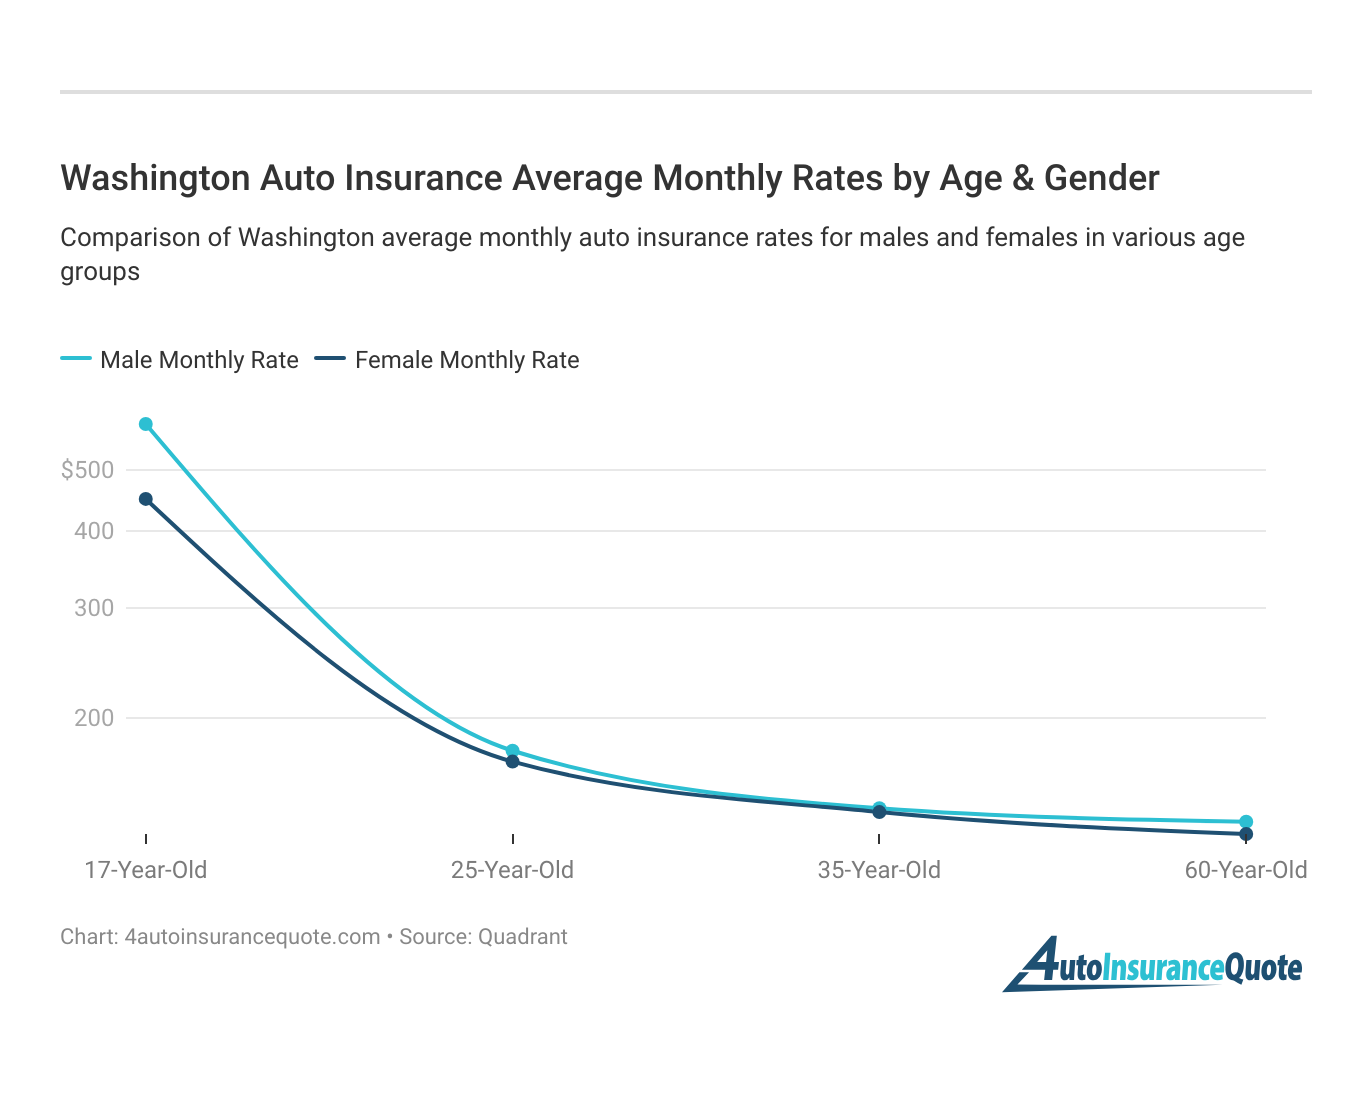 <h3>Washington Auto Insurance Average Monthly Rates by Age & Gender</h3>